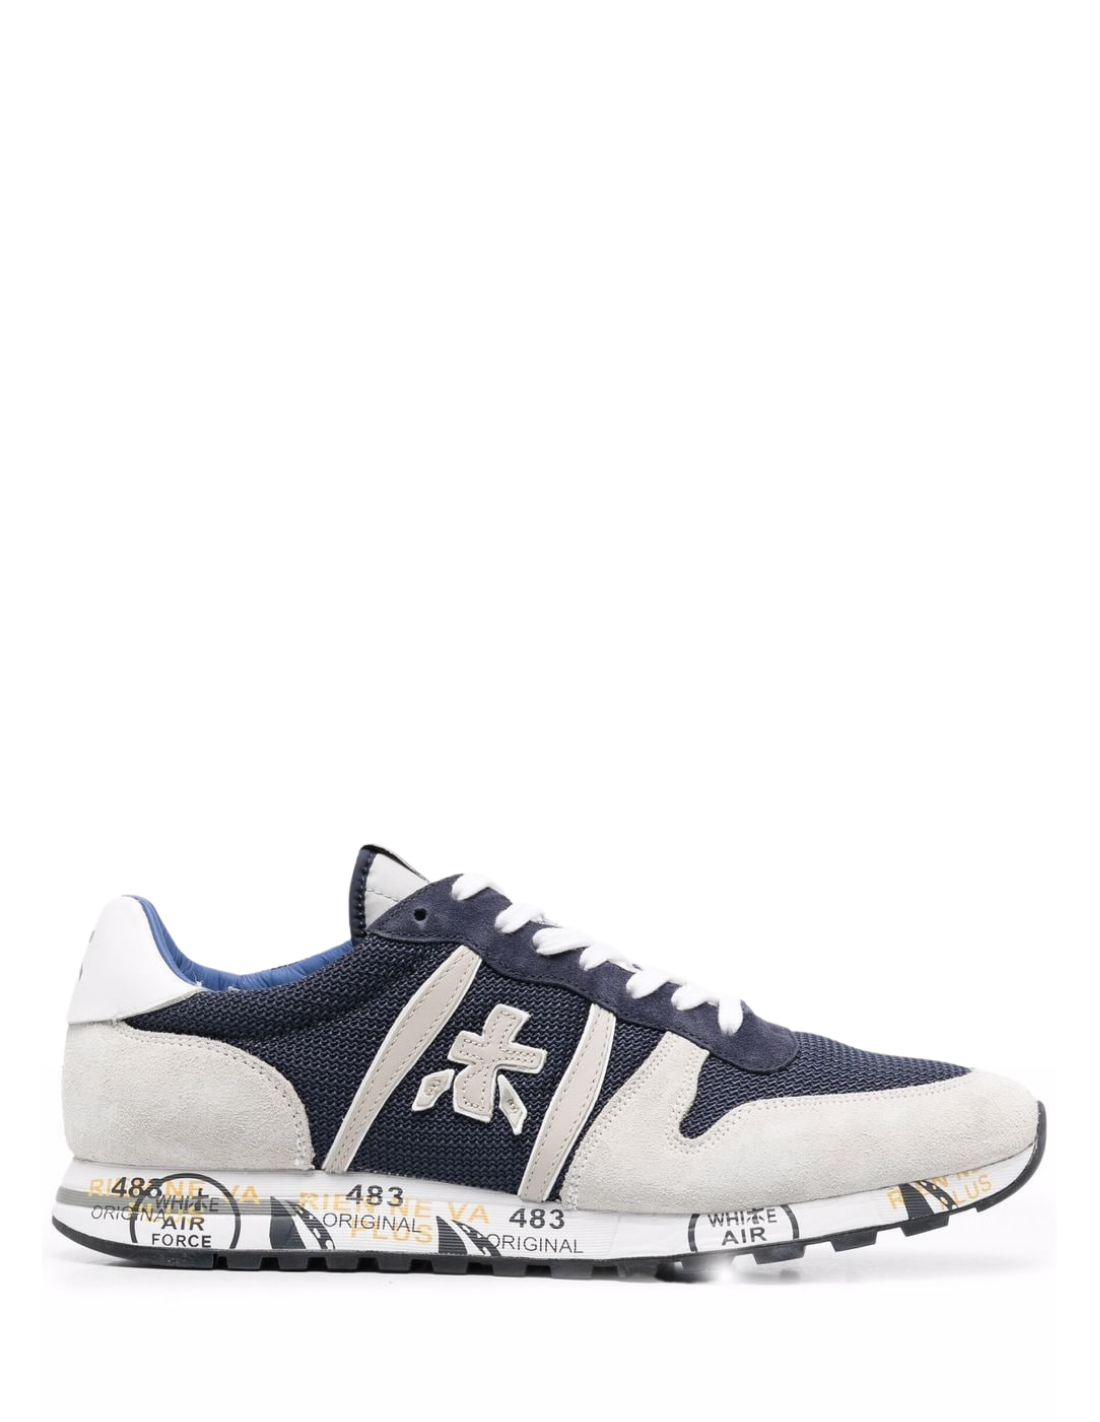 Navy blue leather sneakers 